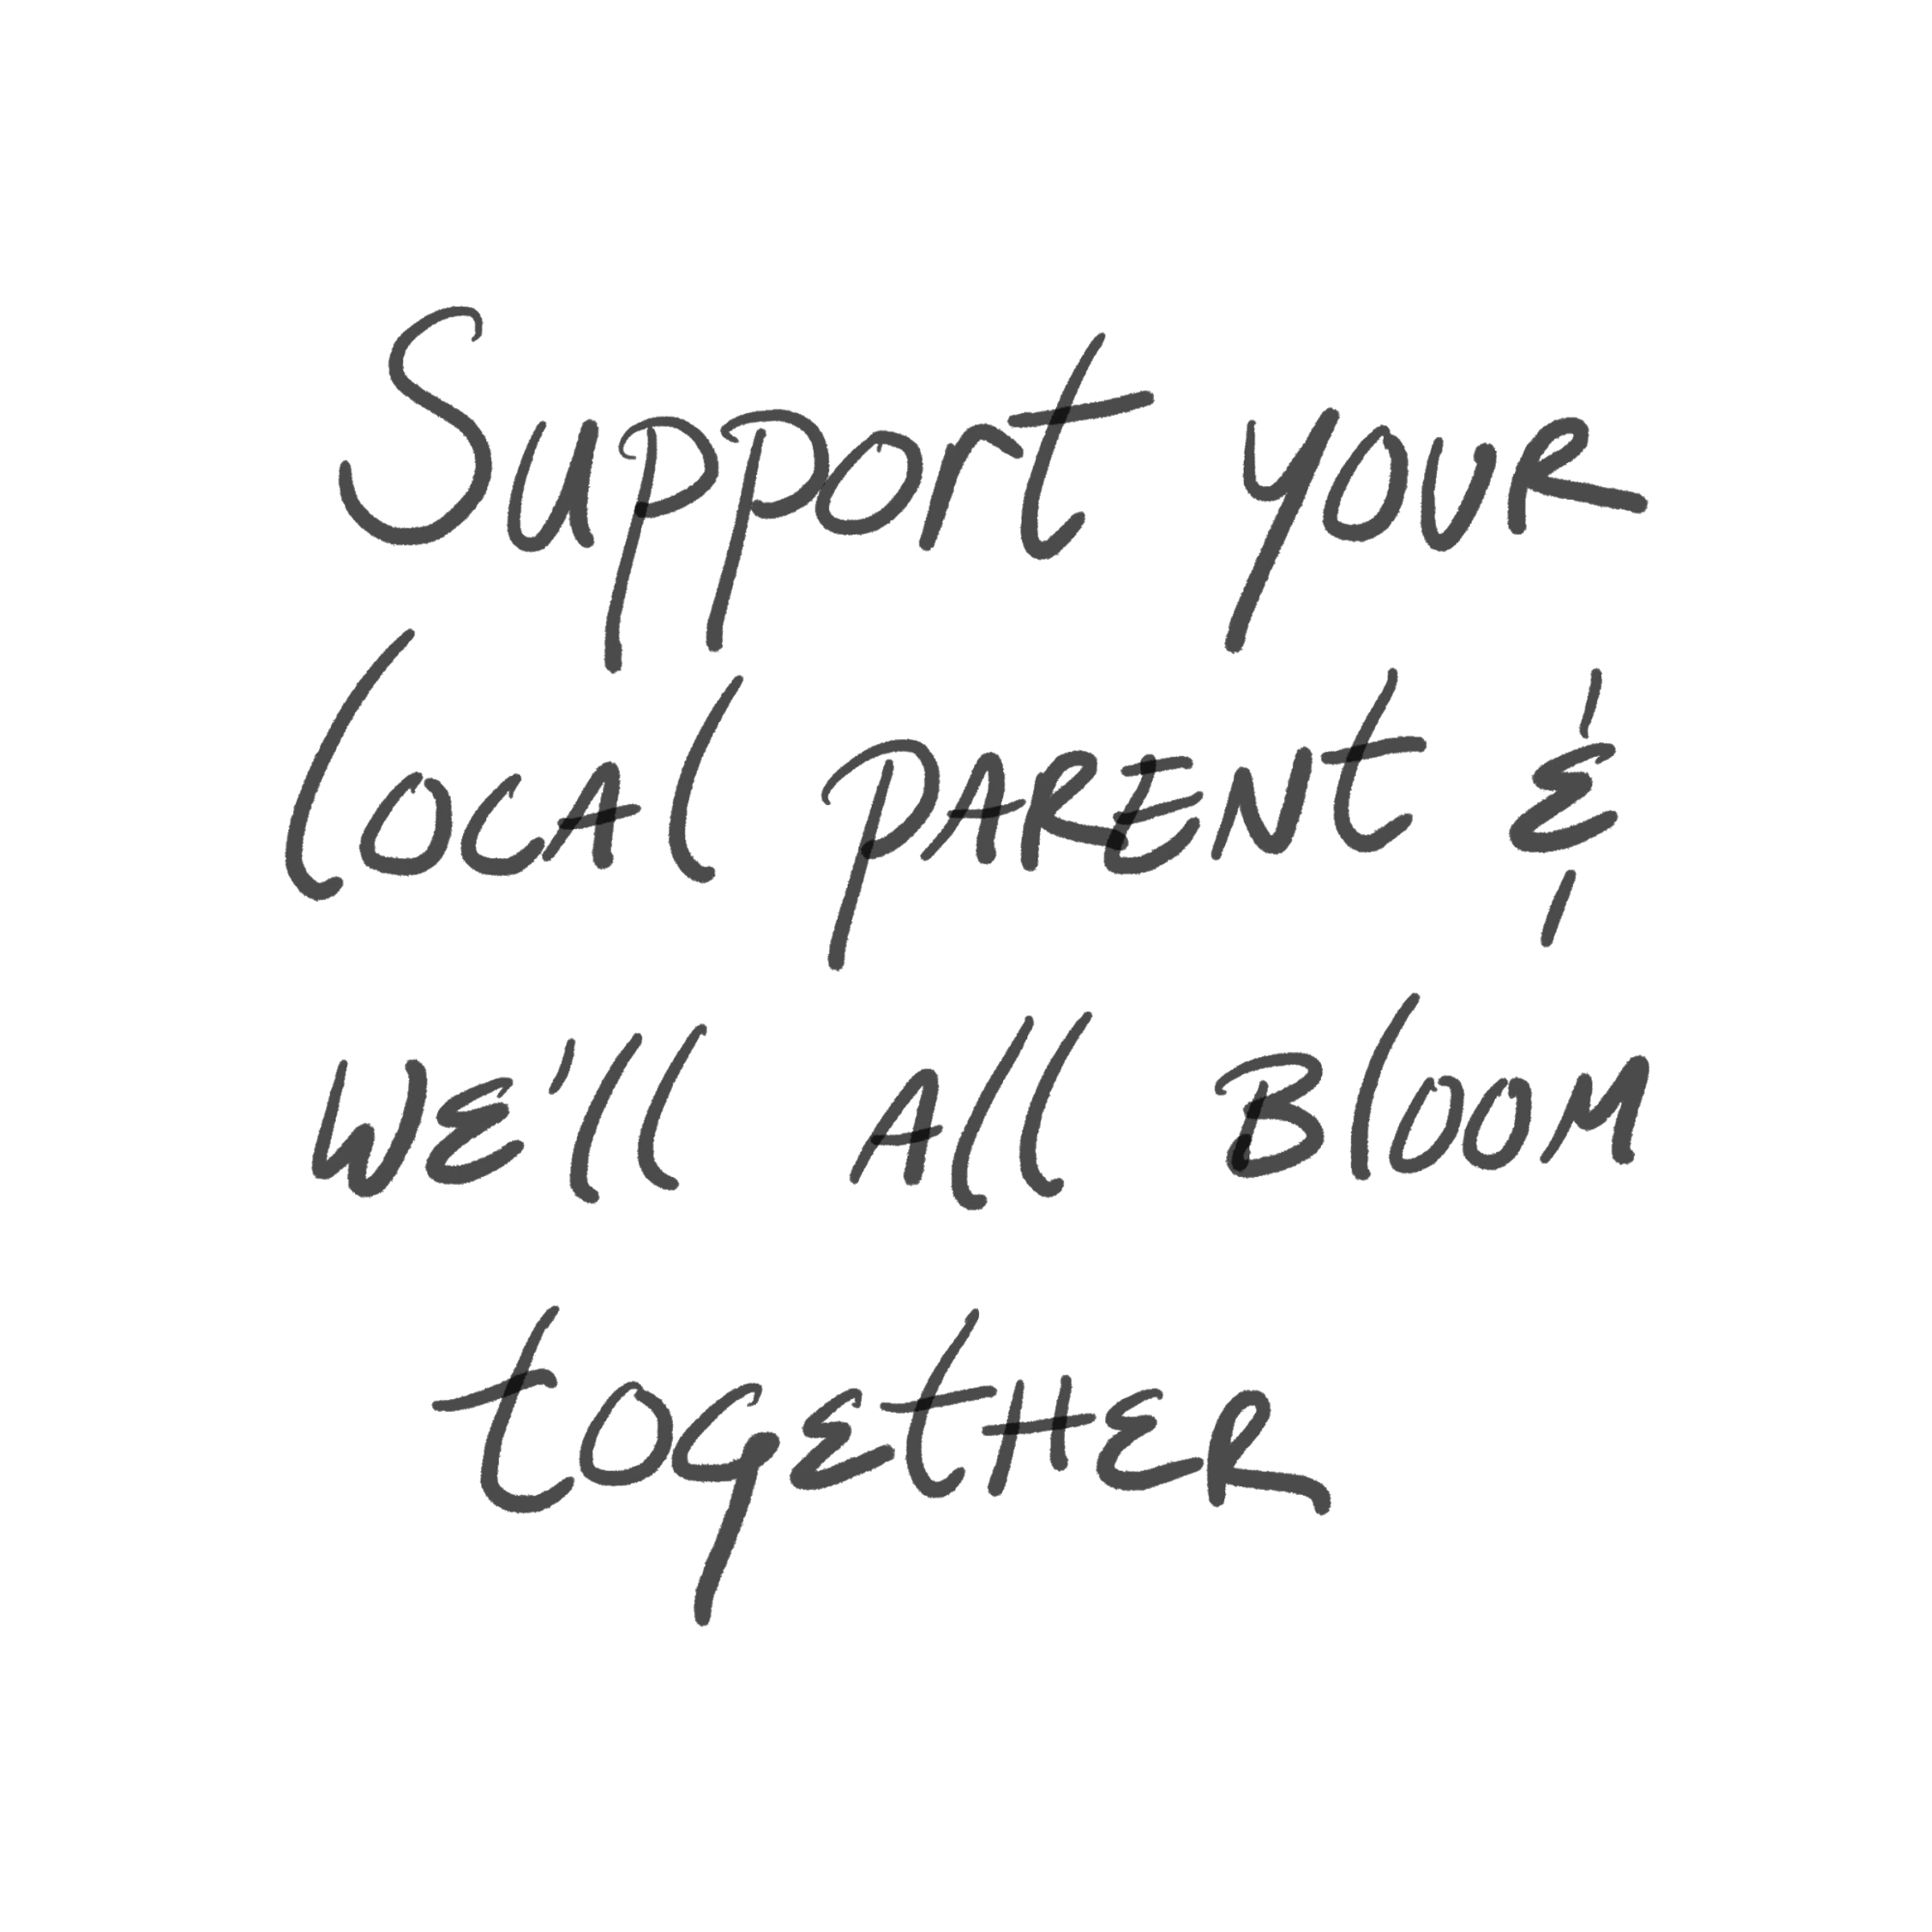 Support your local parent and we'll all bloom together.